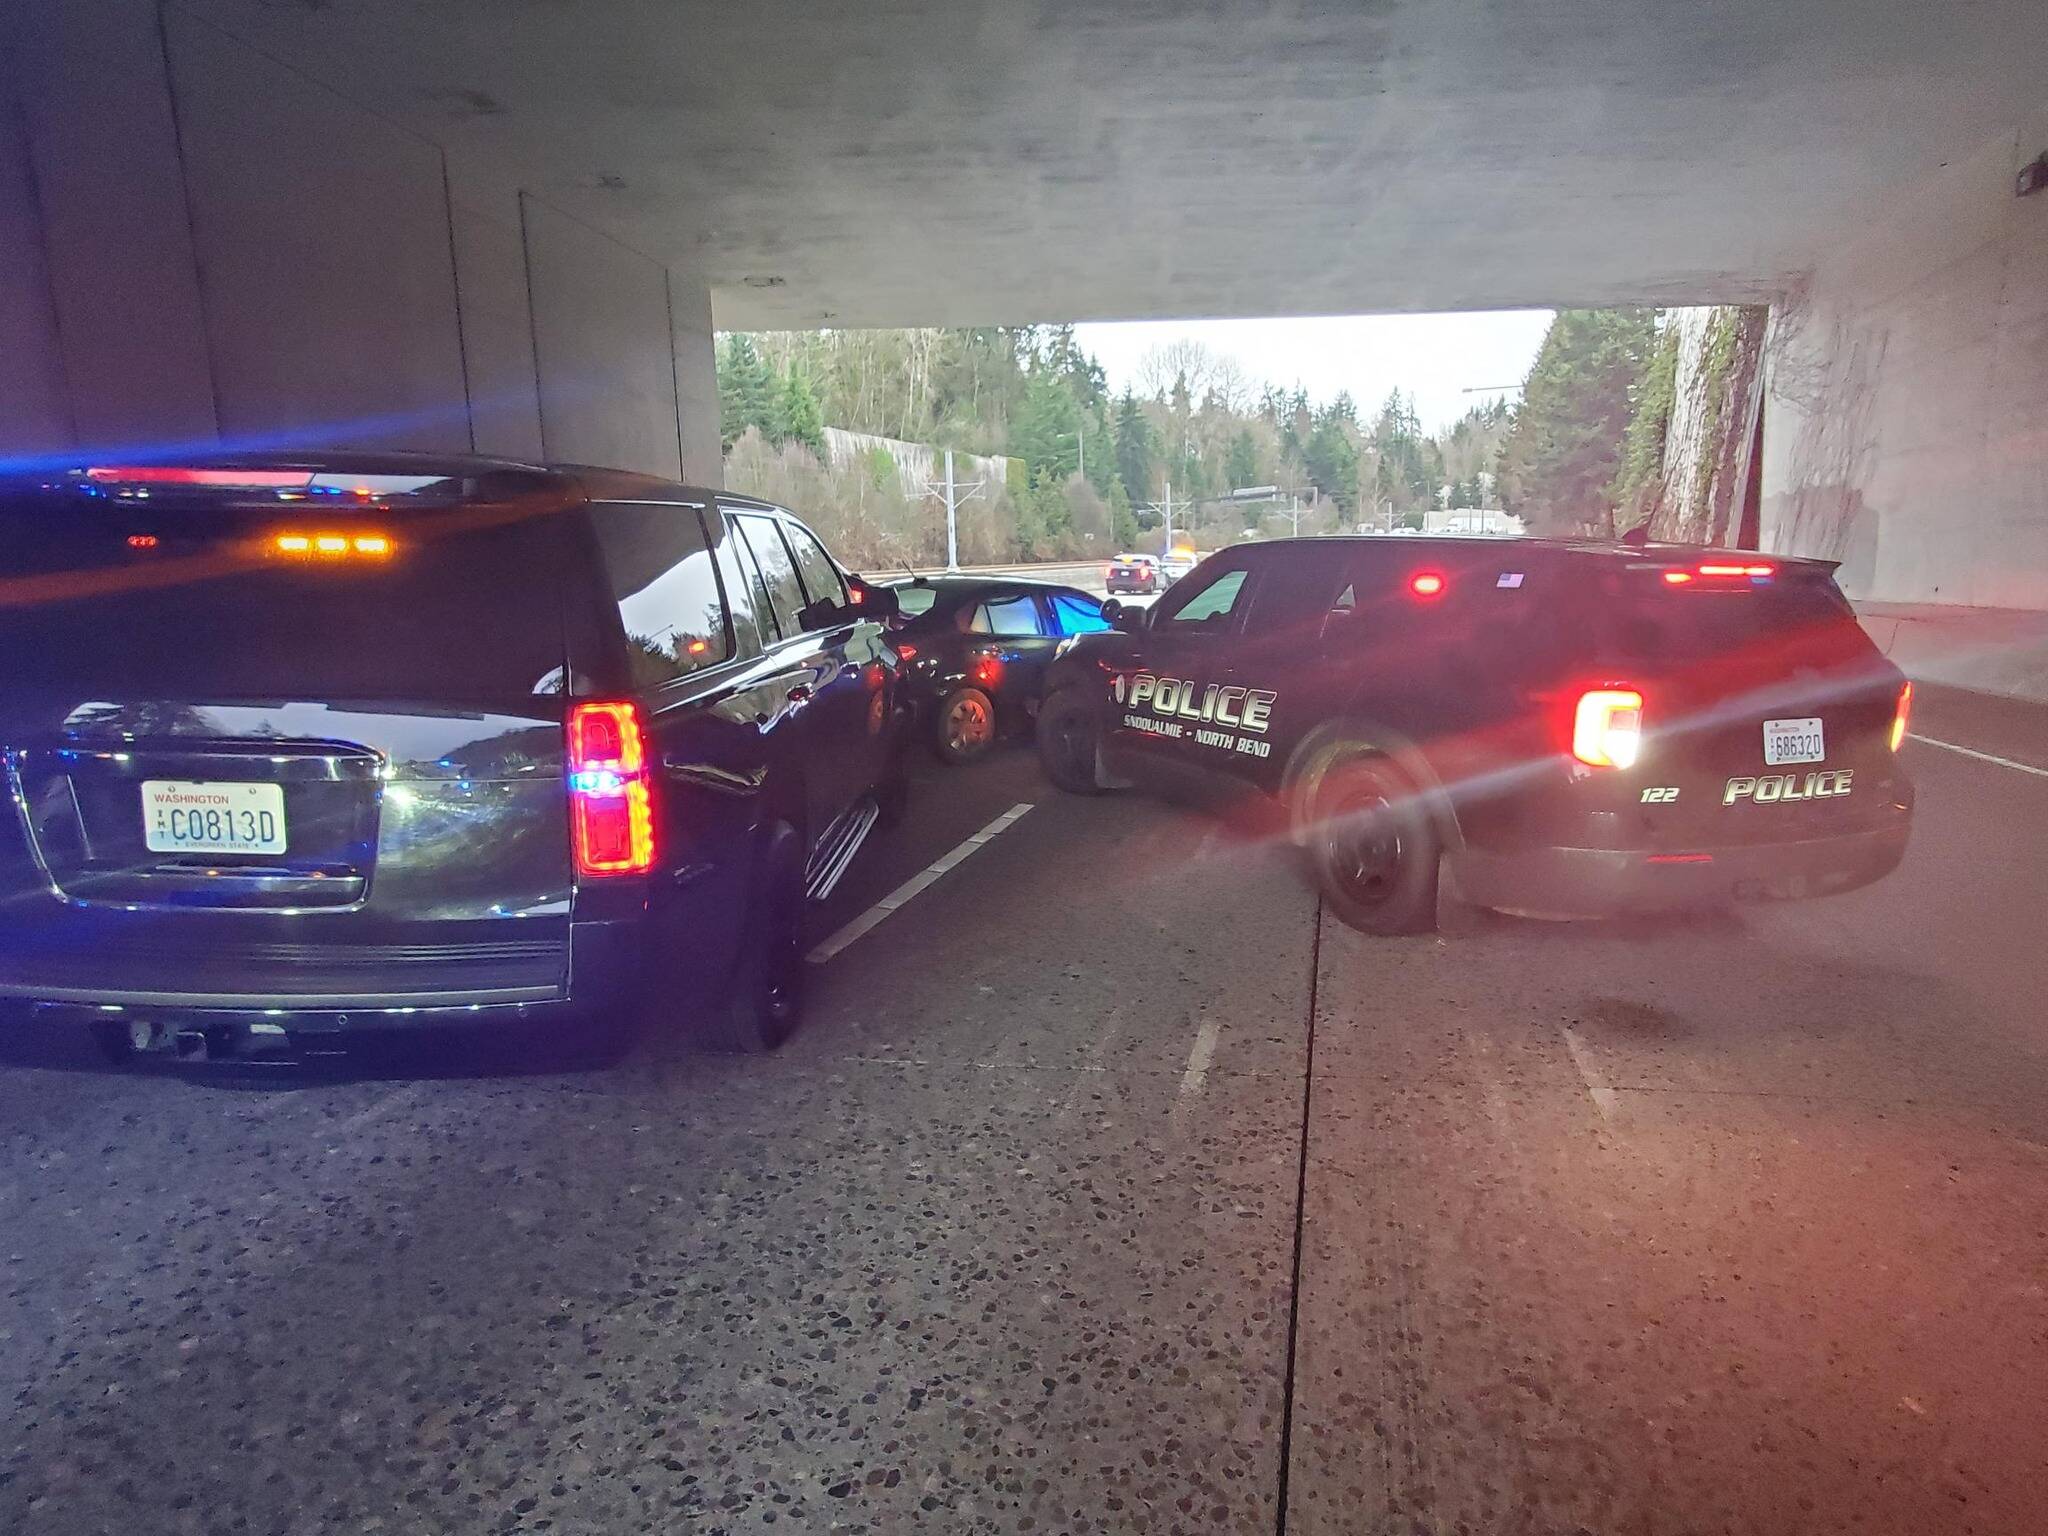 The police pursuit ended near exit 11 on Mercer Island. (Courtesy of Snoqualmie Police Department)